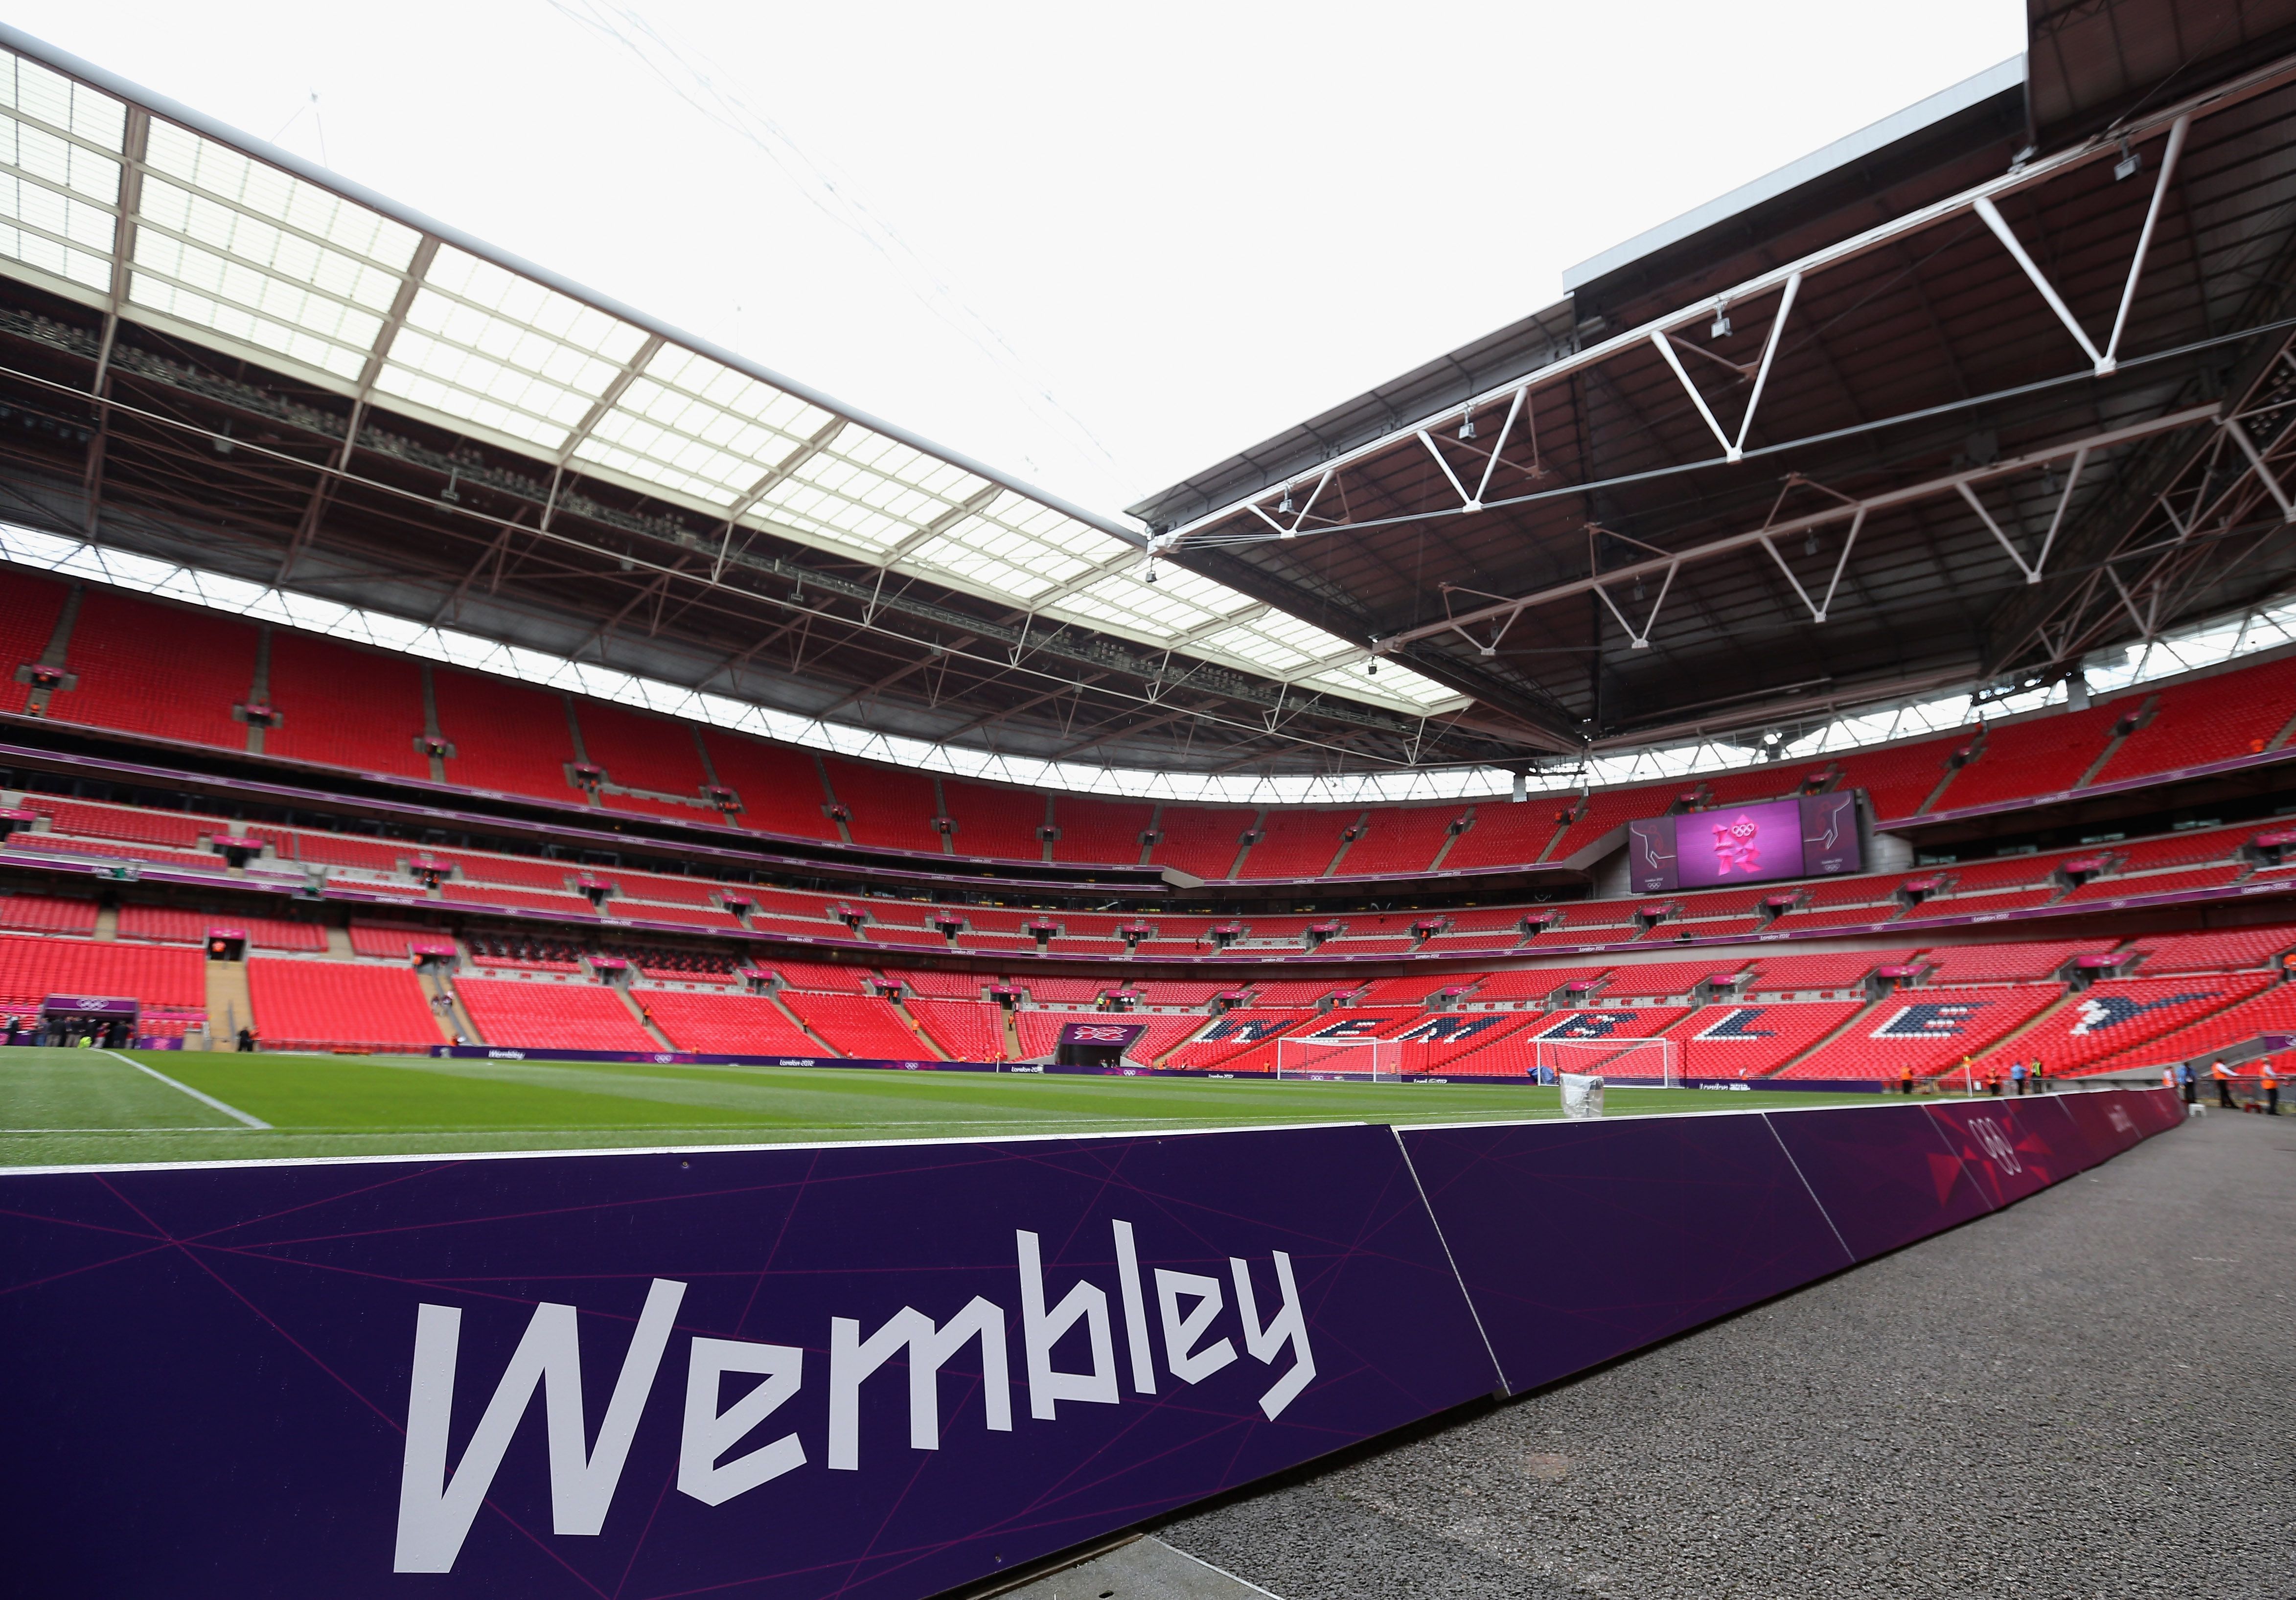 A general view of Wembley Stadium